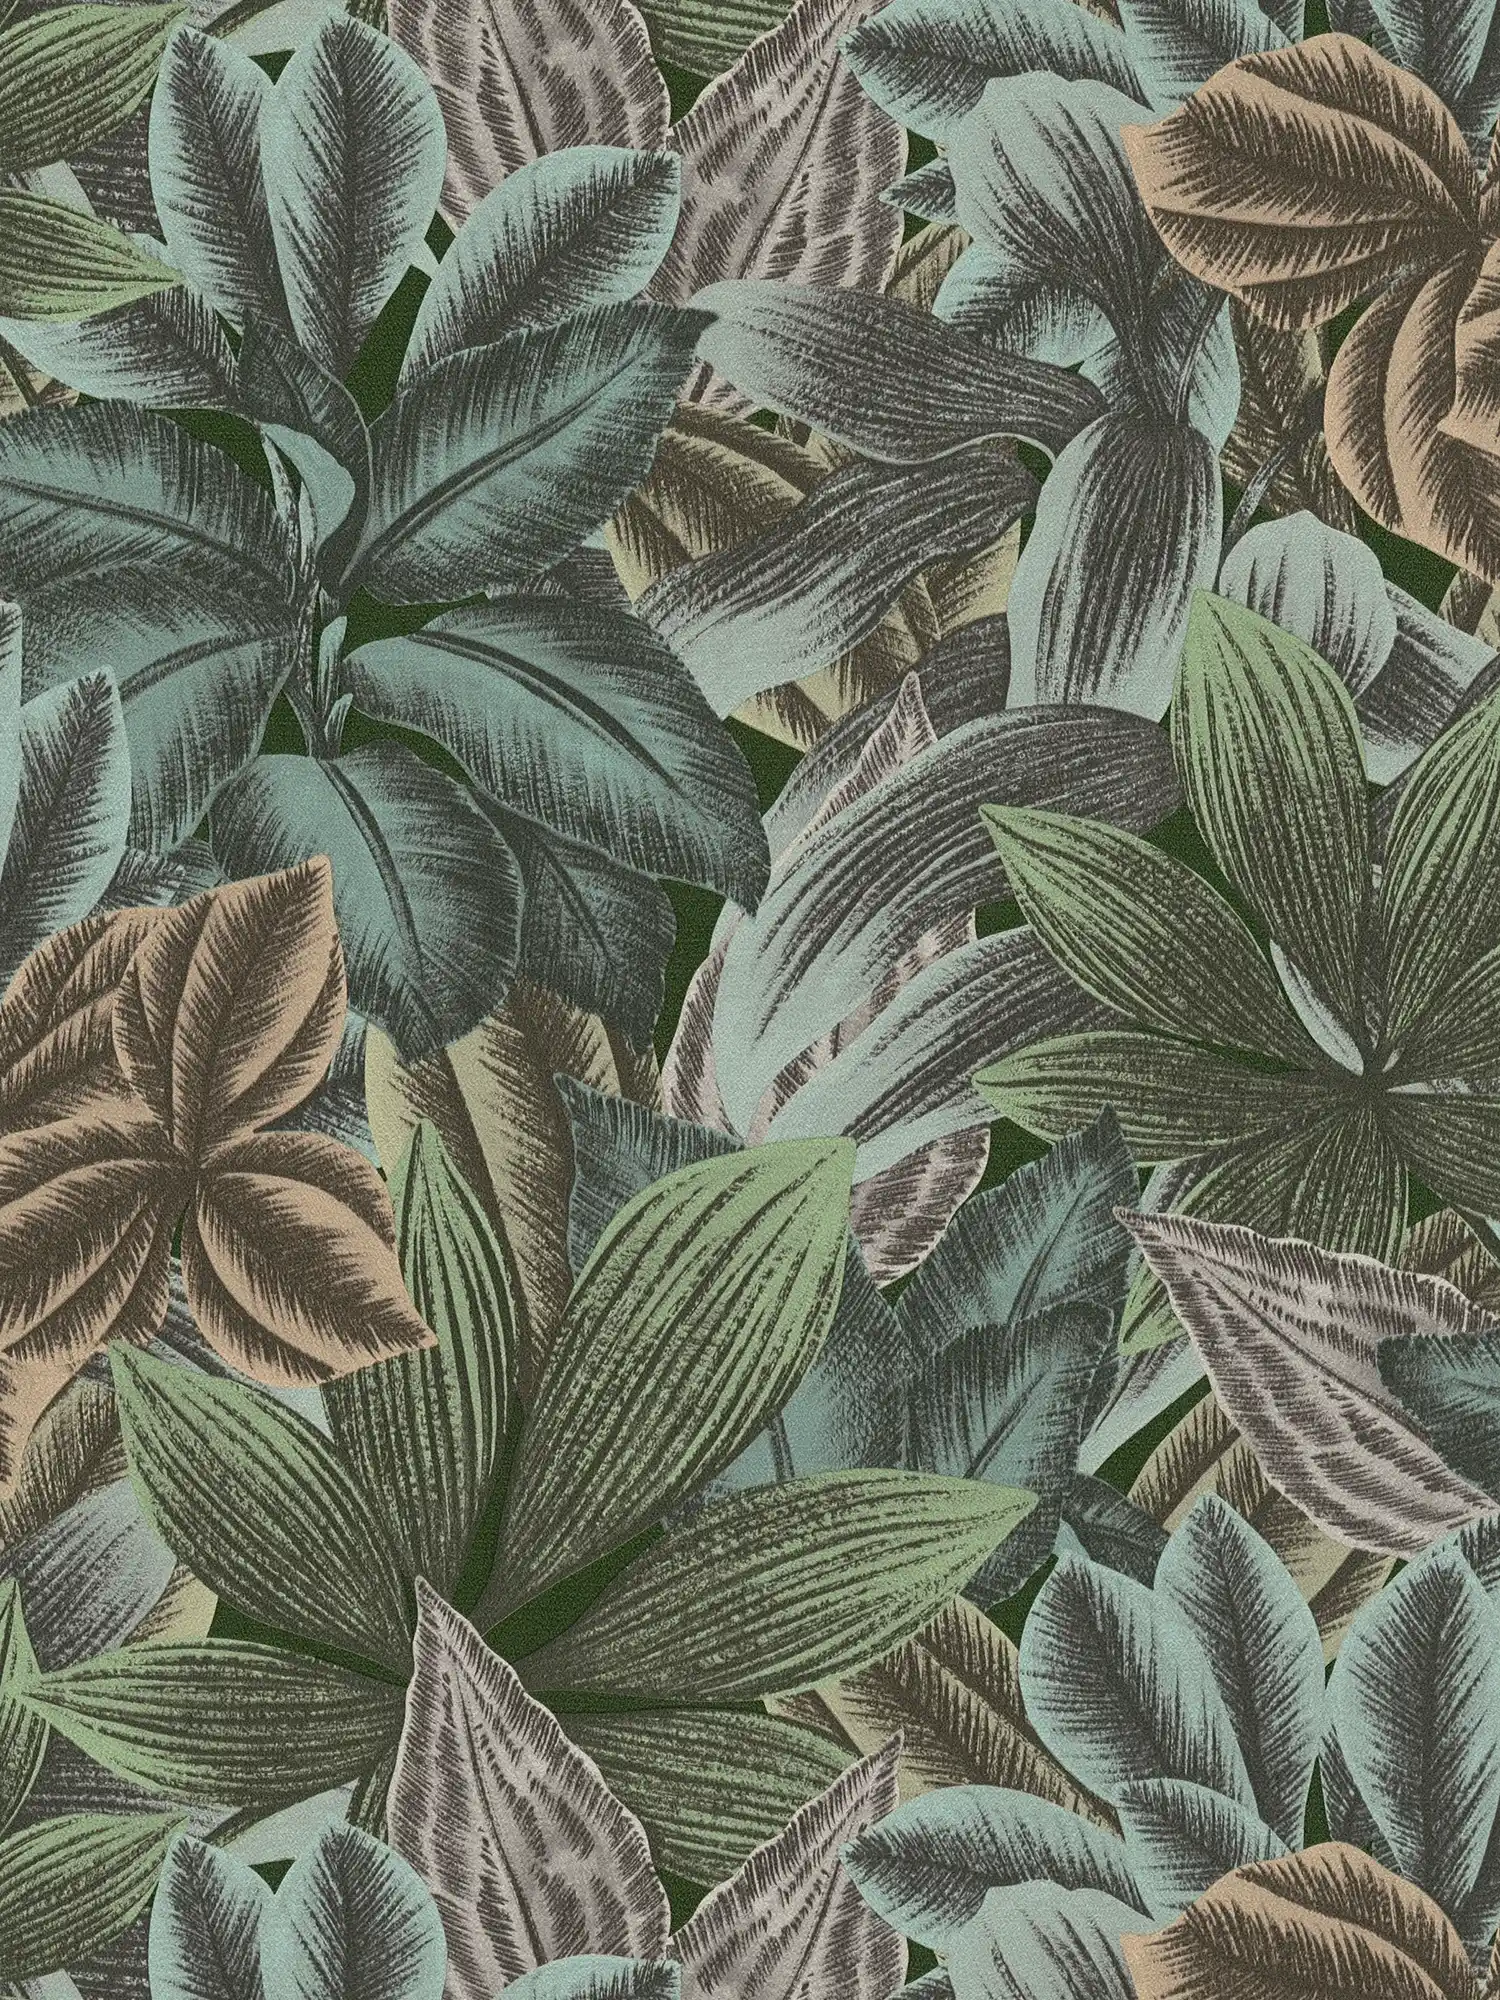 Leaf pattern wallpaper with tropical look - green, blue, grey
